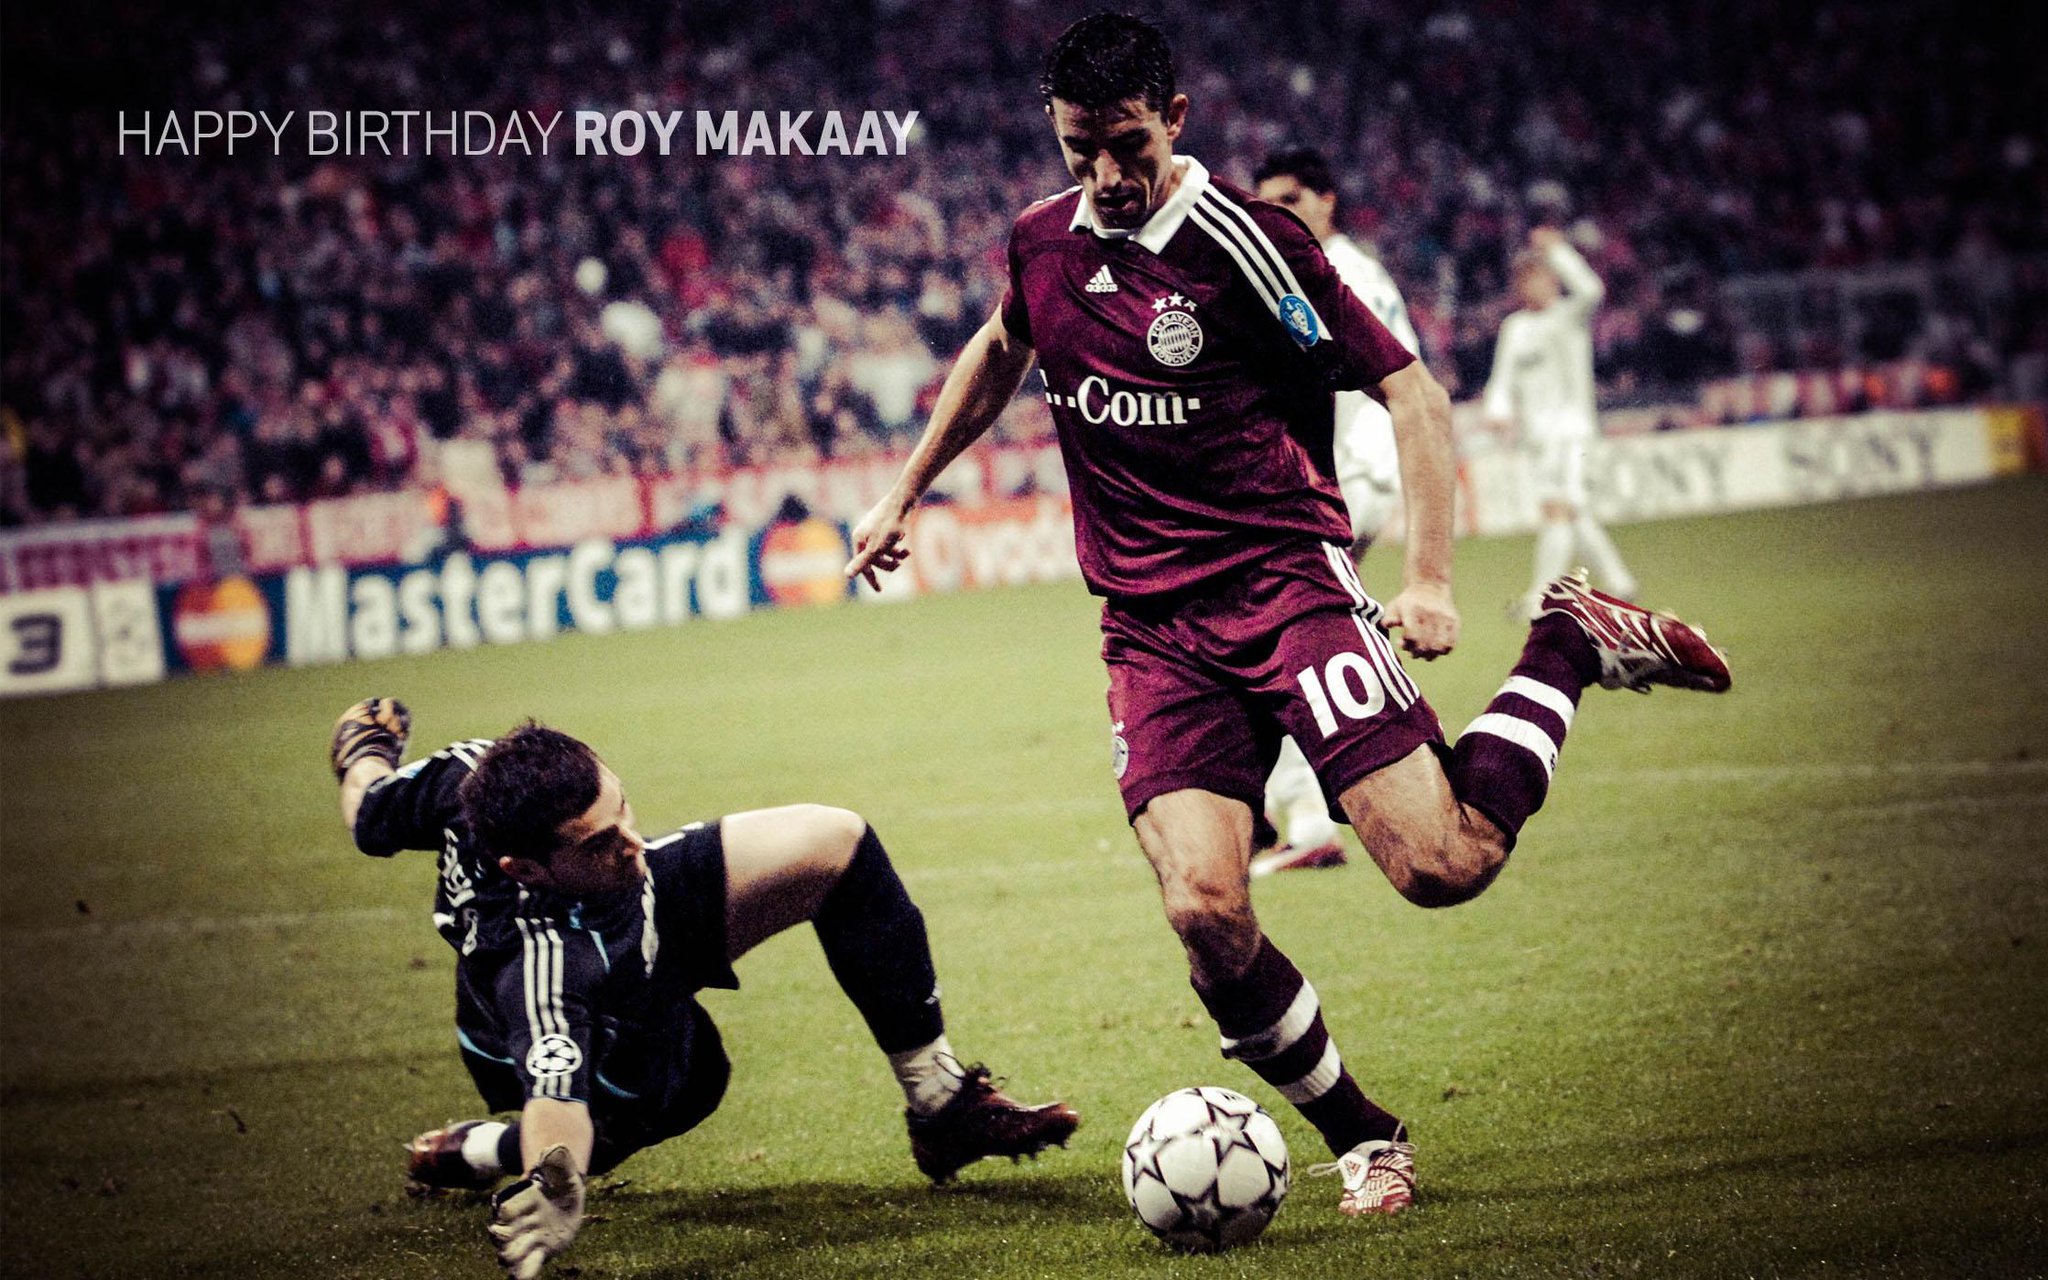 Happy 40th birthday to Roy Makaay, two-time winner with and scorer of the quickest goal 